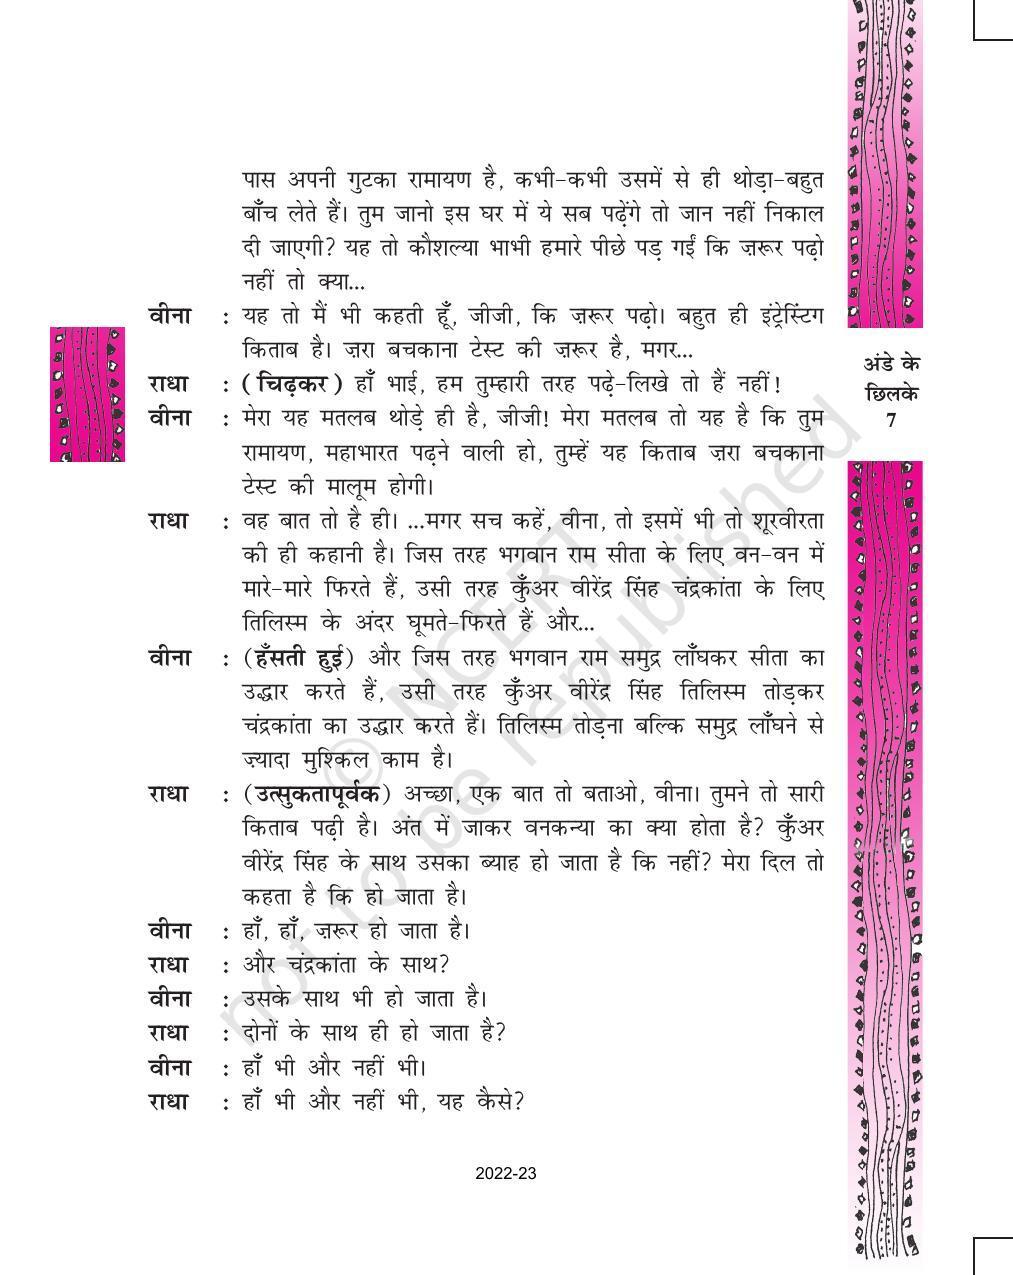 NCERT Book for Class 11 Hindi Antral Chapter 1 अंडे के छिलके - Page 7